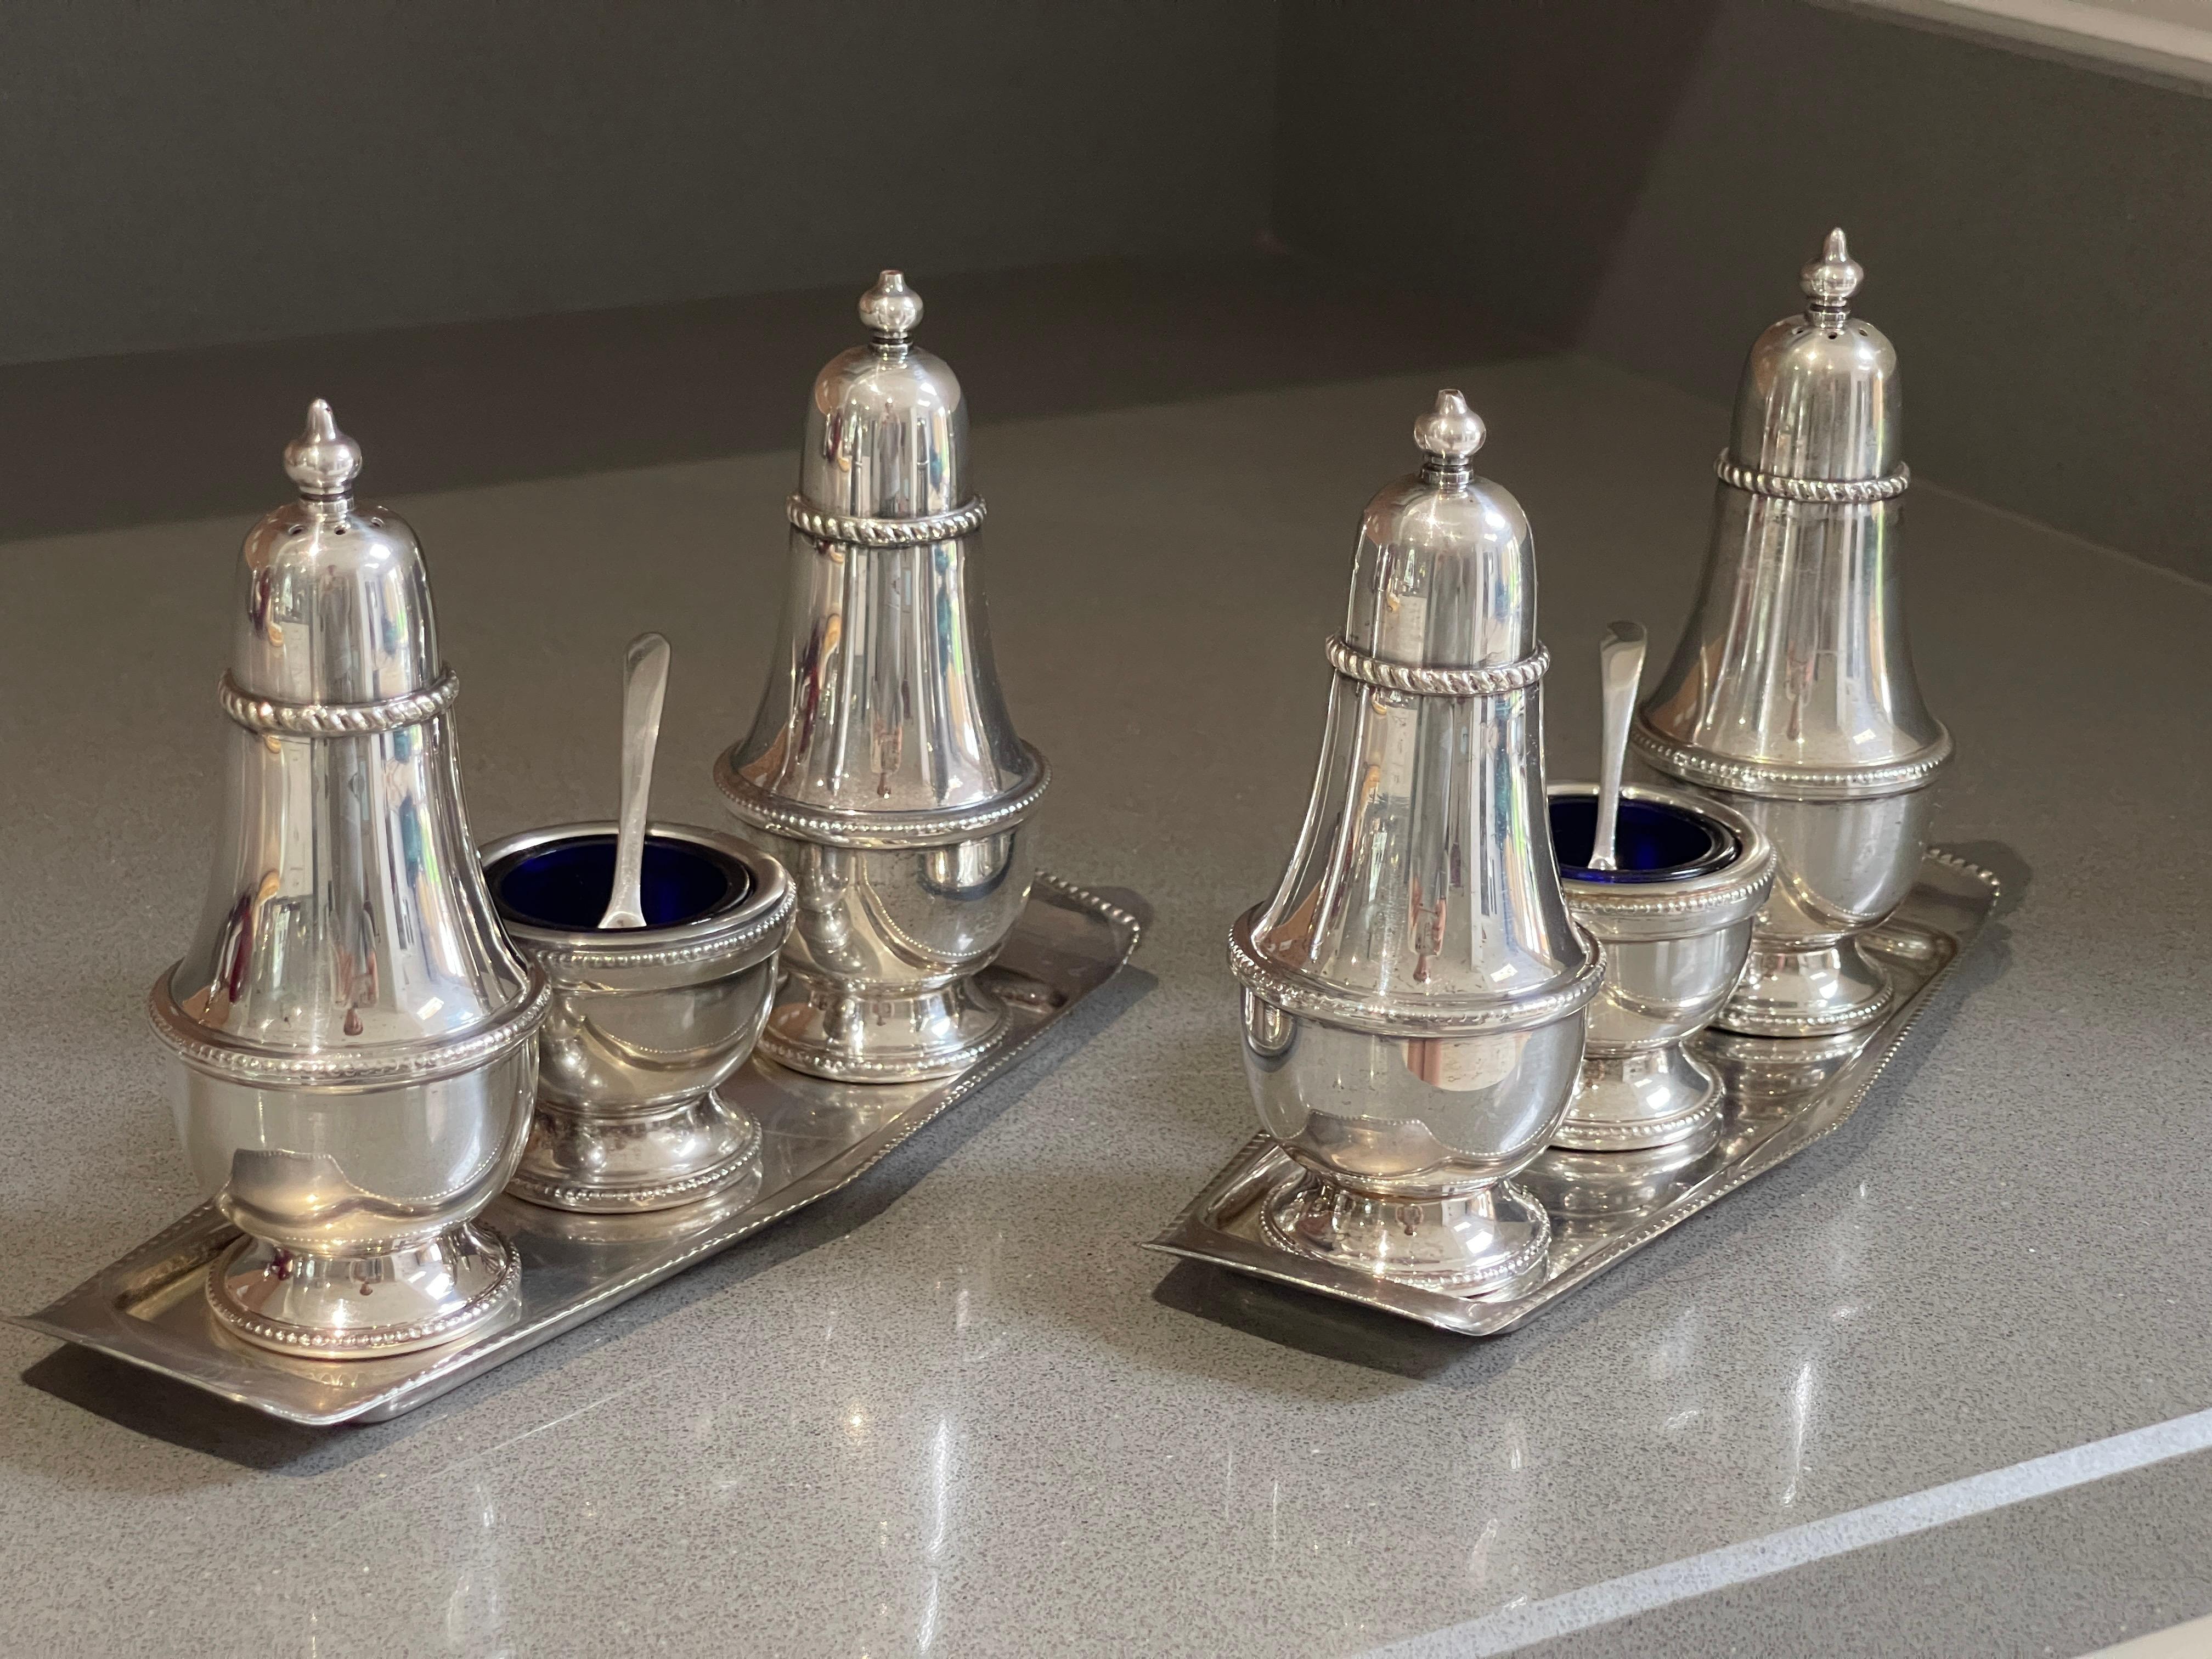 A pair of modernist Silver Condiment sets comprising a Salt shaker, a Pepper Shaker, a Mustard Pot & a spoon. The mustard pot has a blue glass bowl and a silver spoon. Each item's exterior has an elegant tress pattern around it.

Made in London in